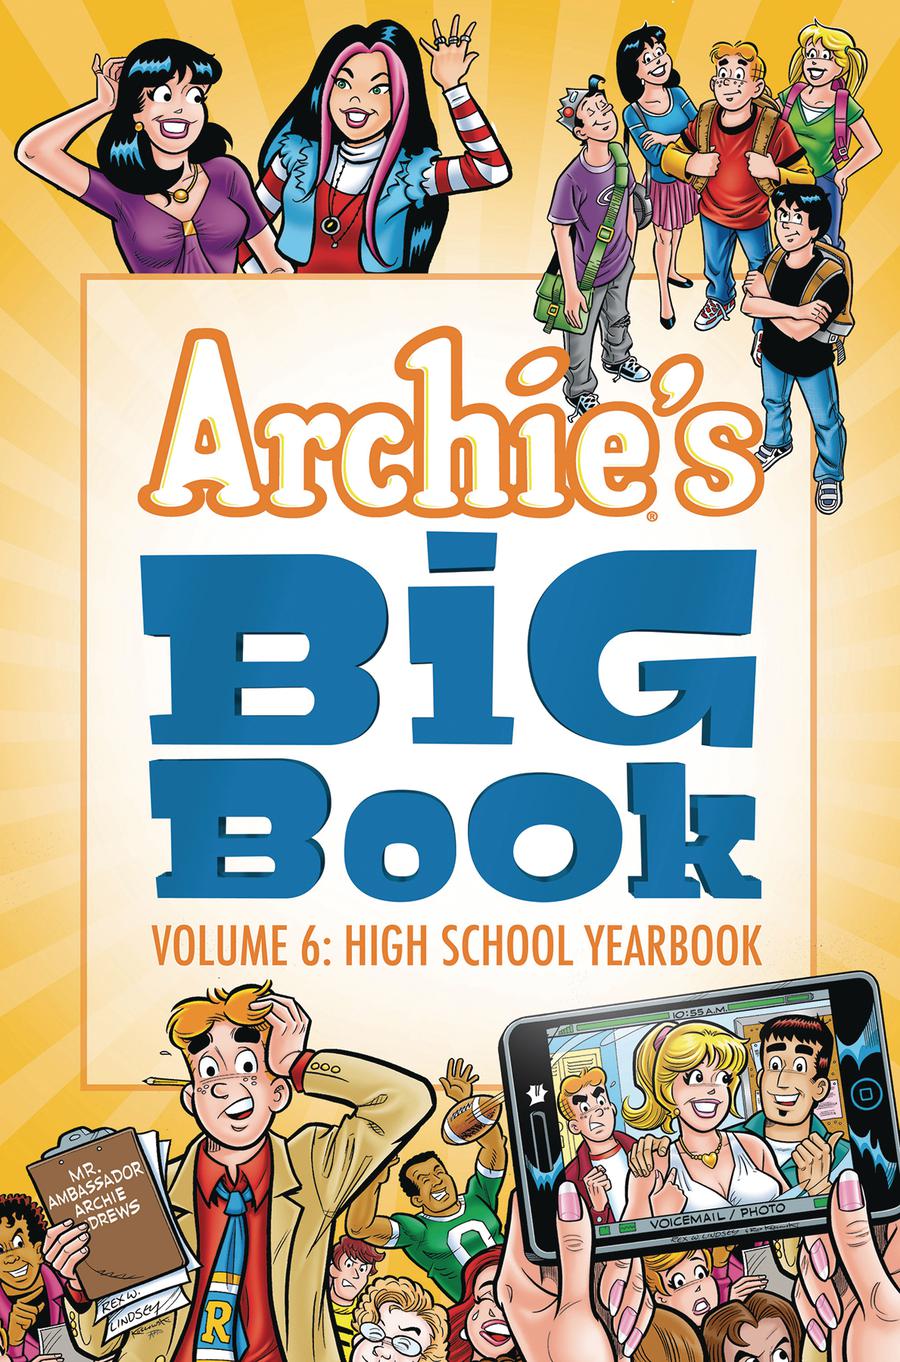 Archies Big Book Vol 6 High School Yearbook TP